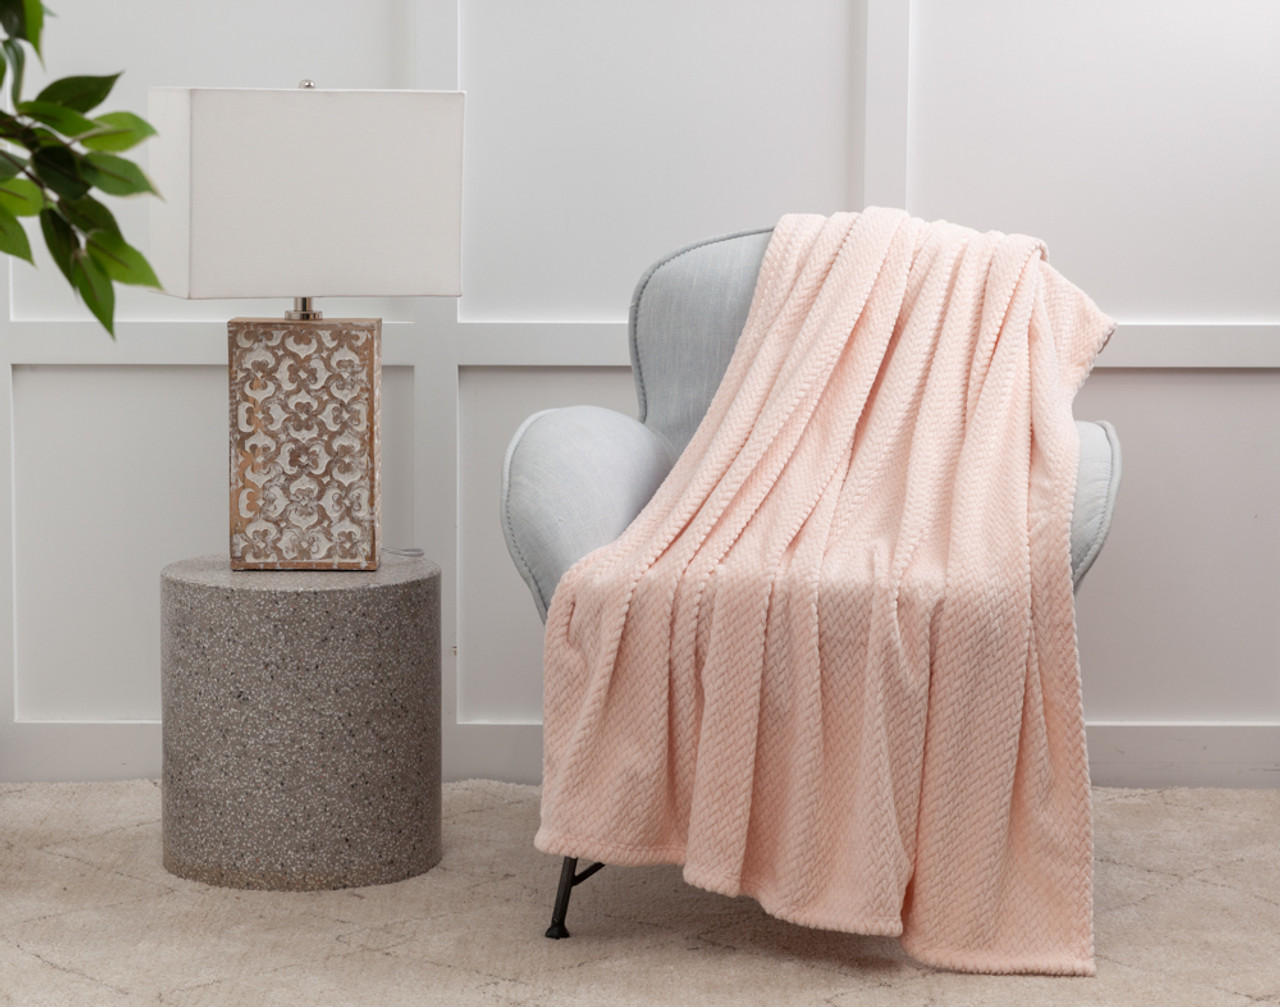 Our Chevron Plush Throw in Blush over a white chair next to an lamp table.